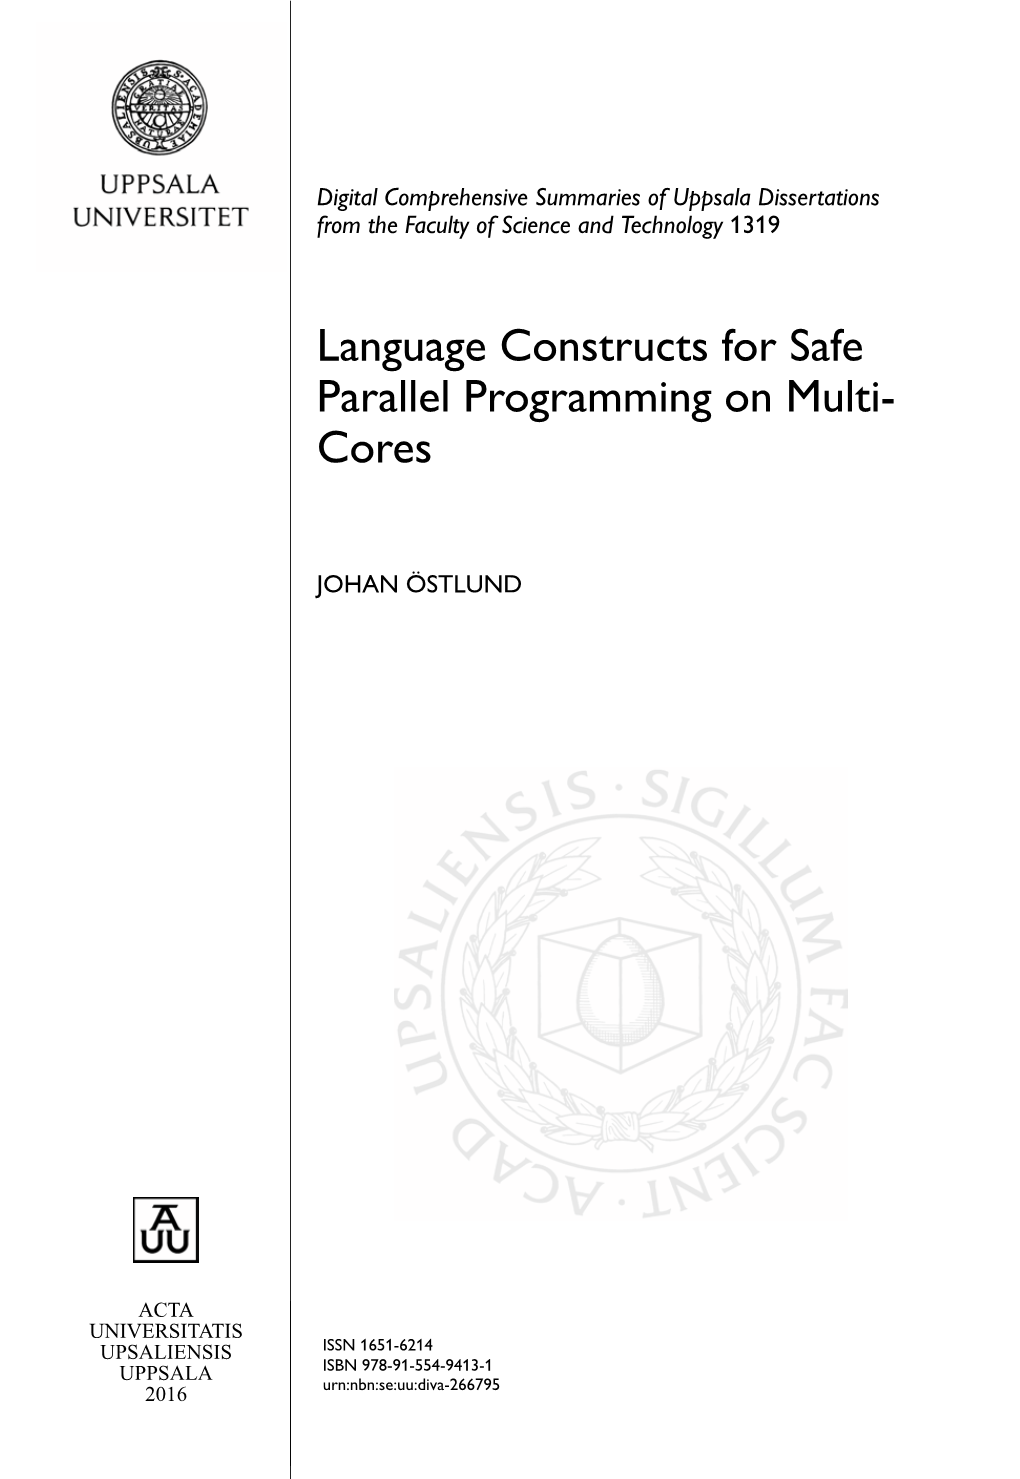 Language Constructs for Safe Parallel Programming on Multi- Cores